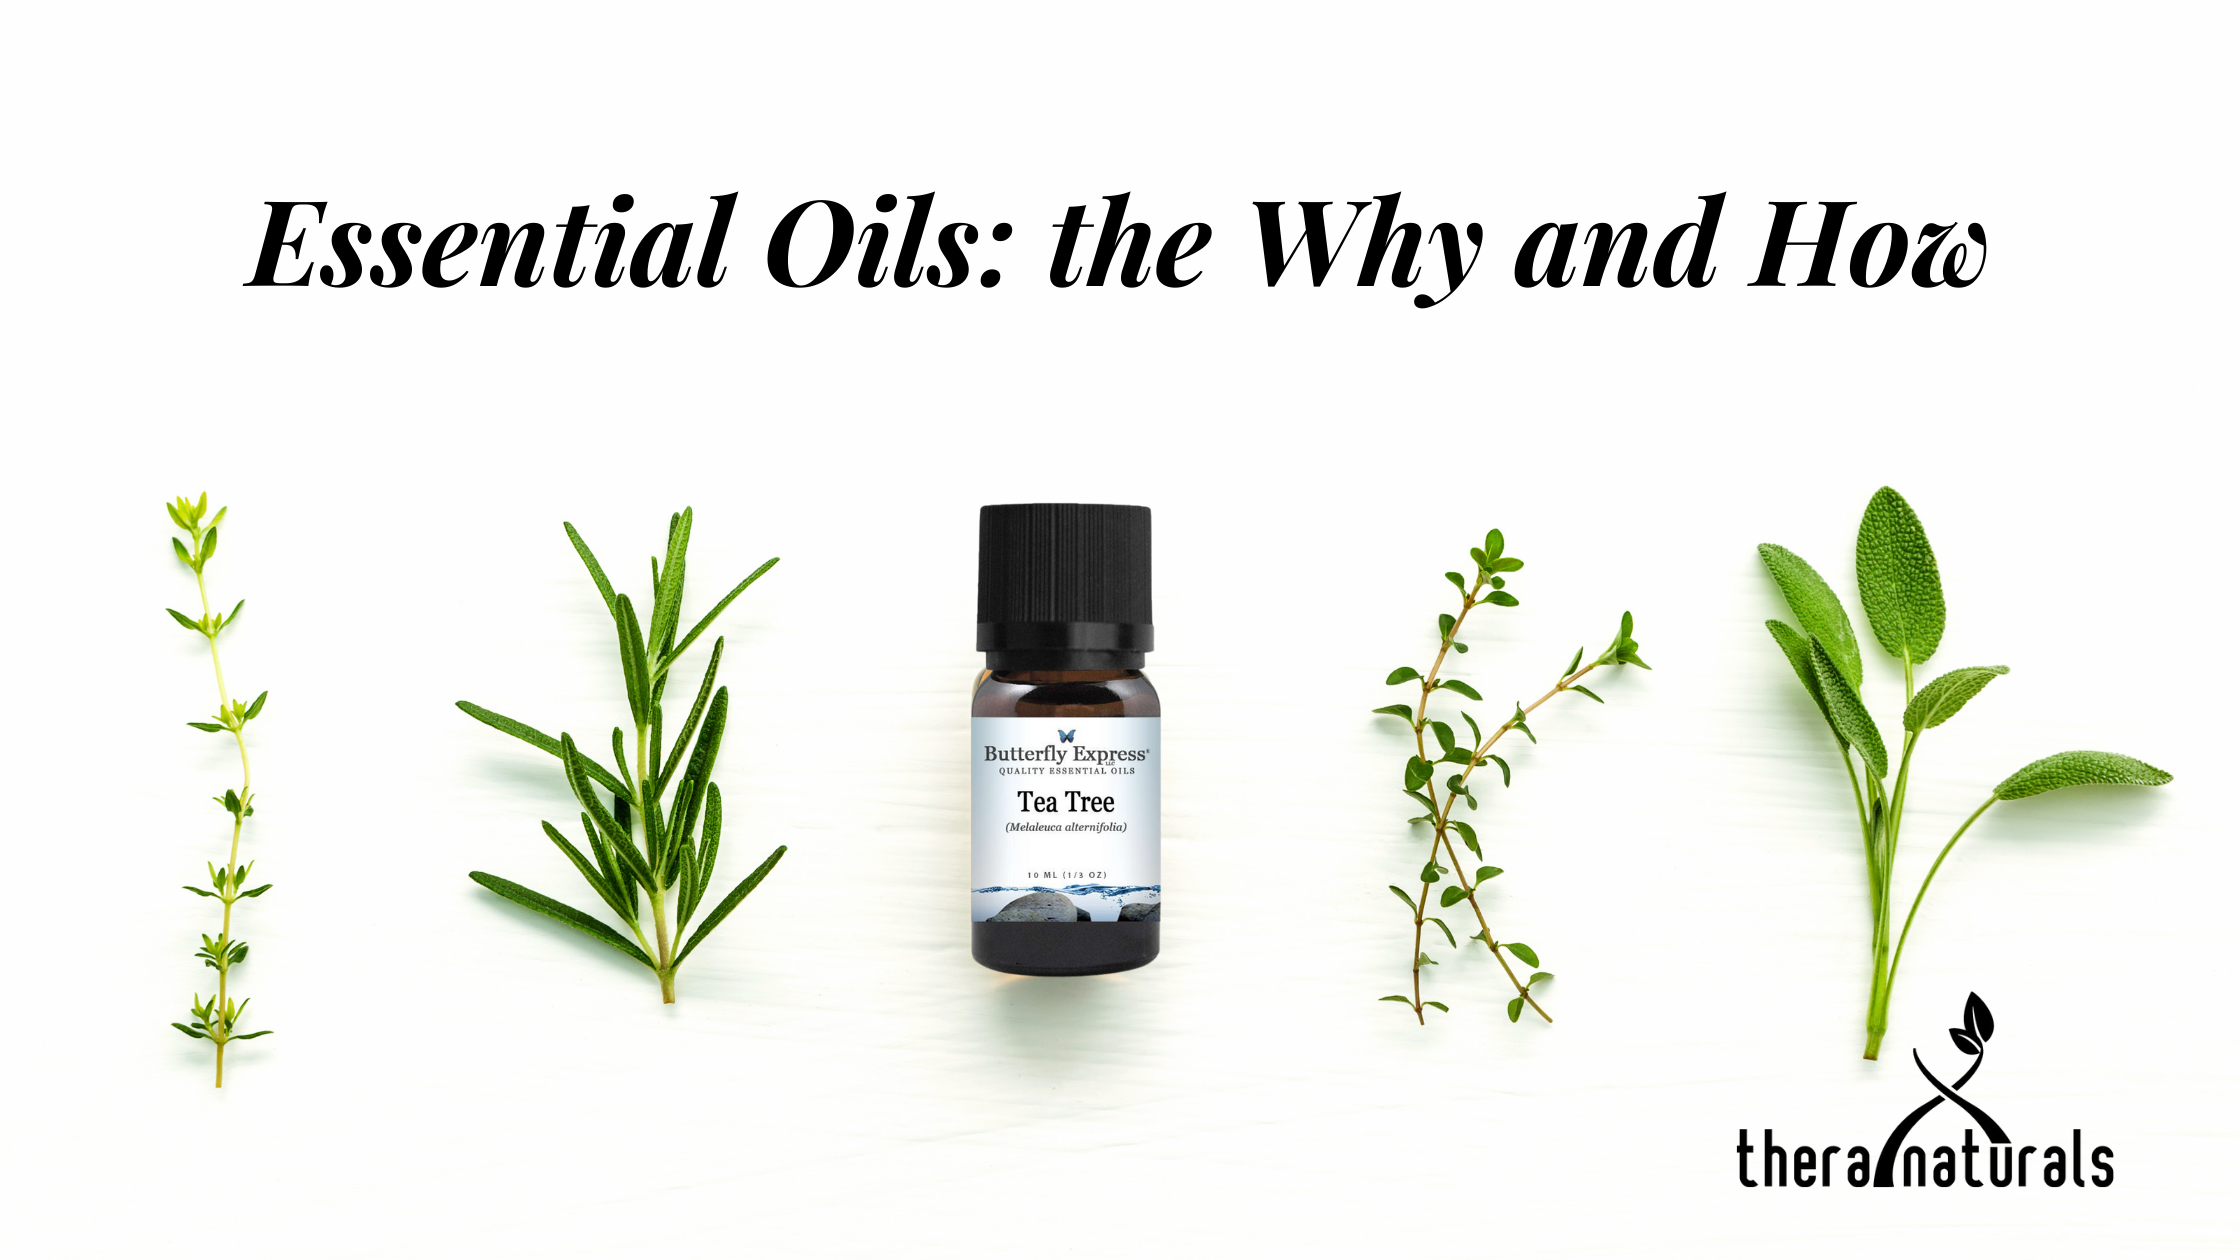 Essential Oils: The Why and How